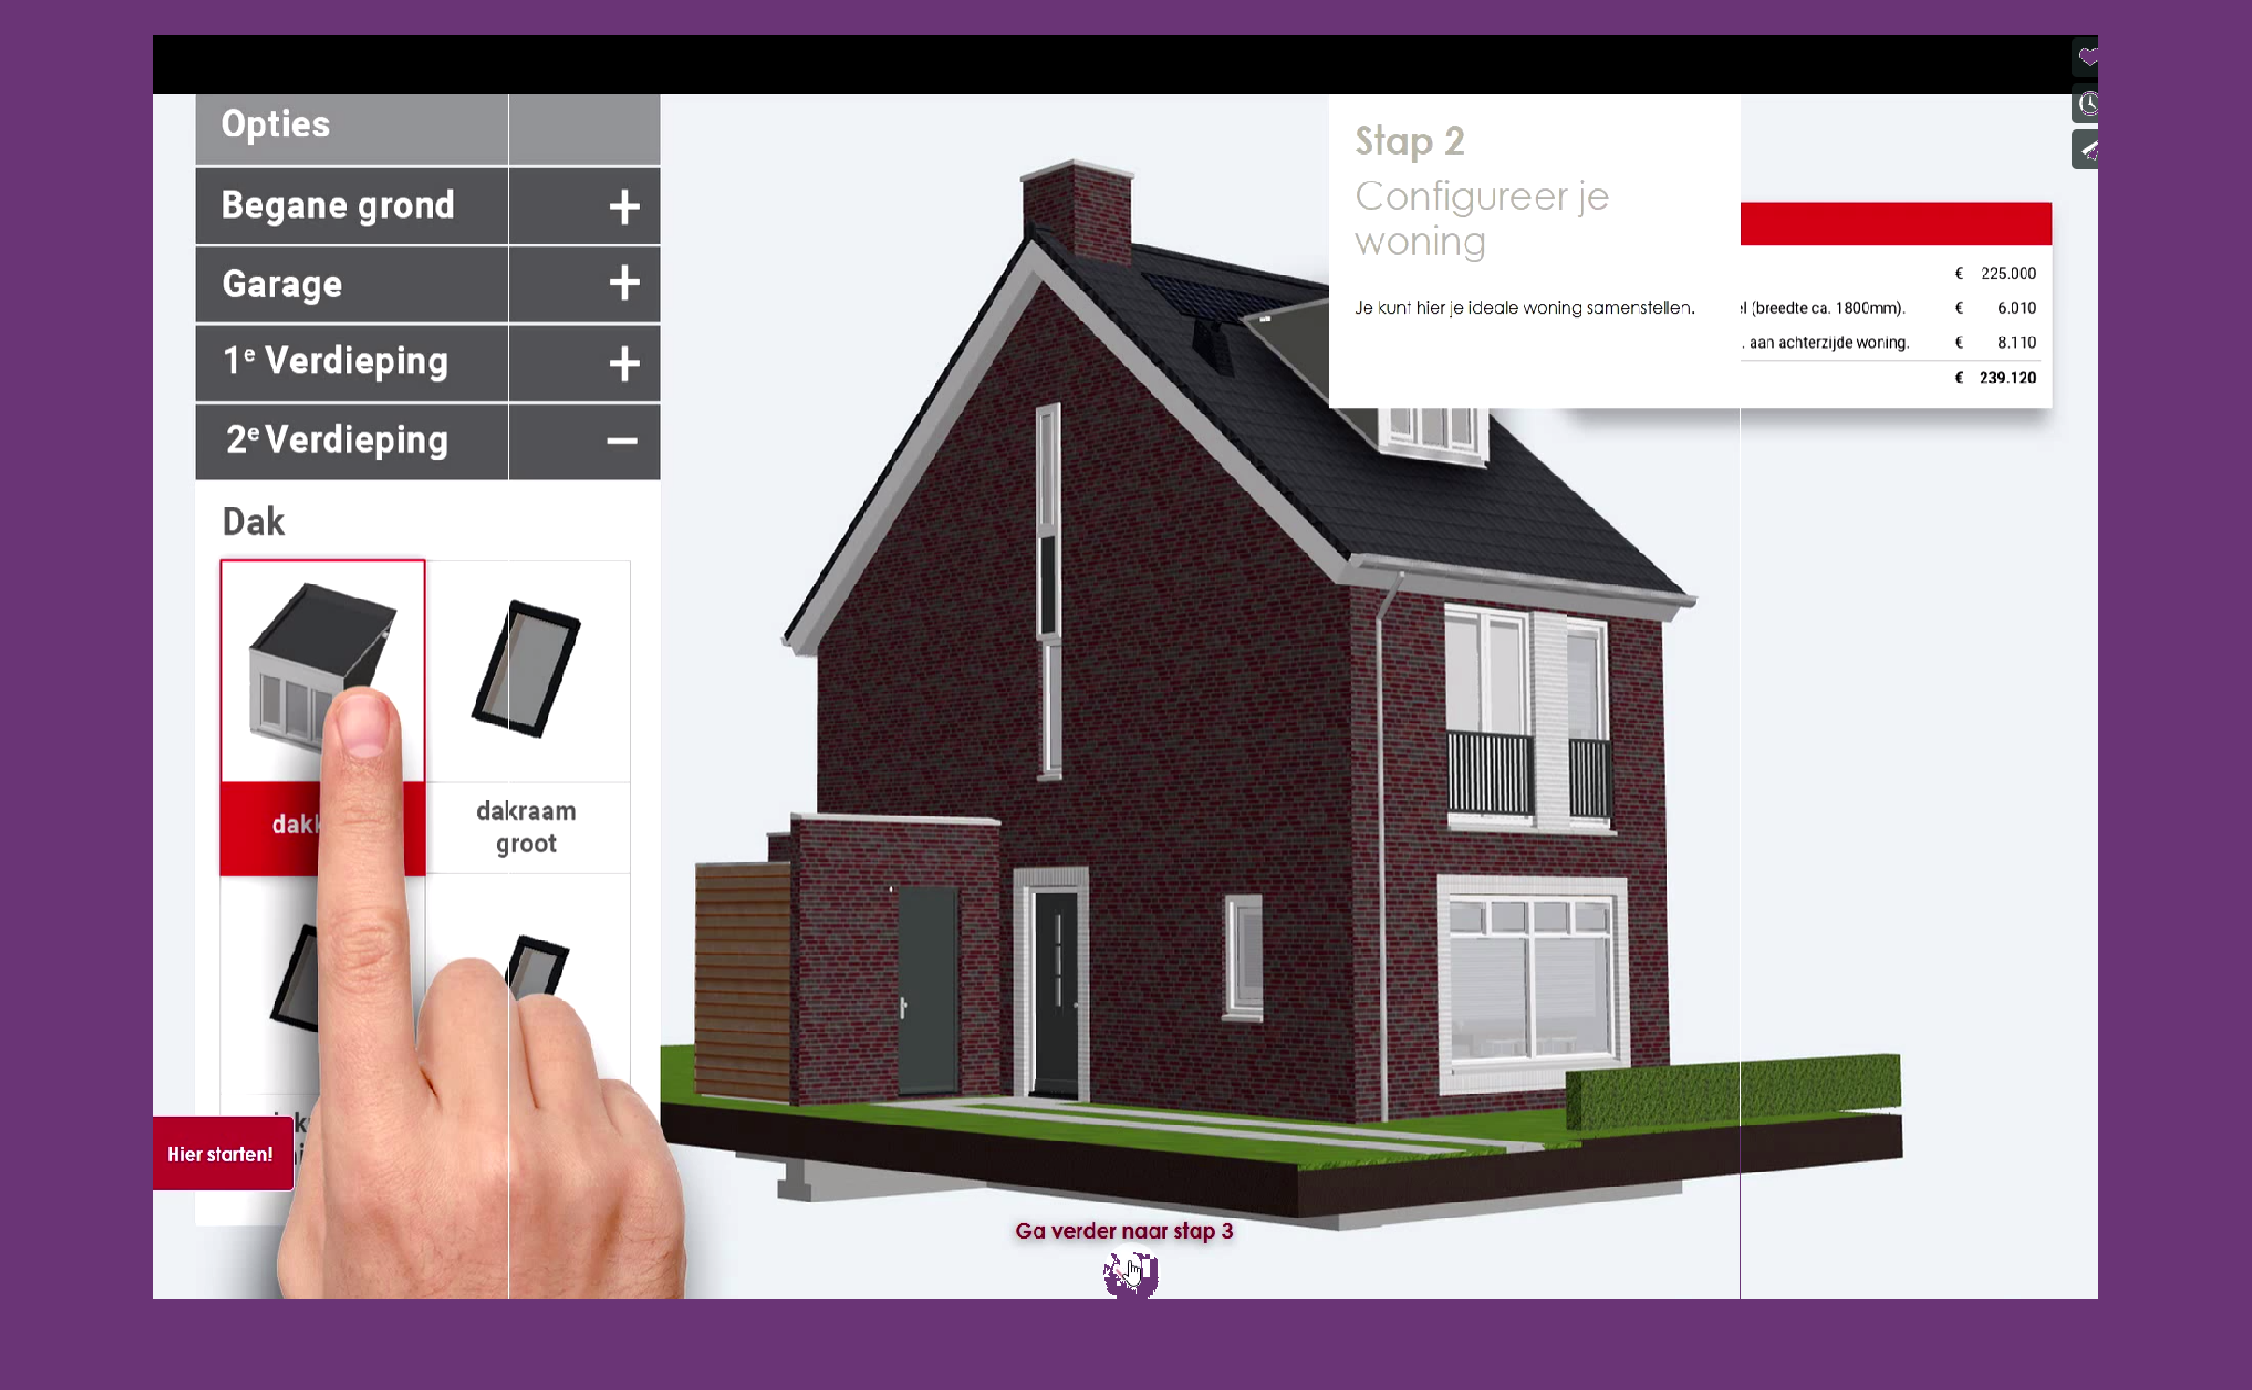 Renovation of semi-attached homes of housing association using Woonconnect tool